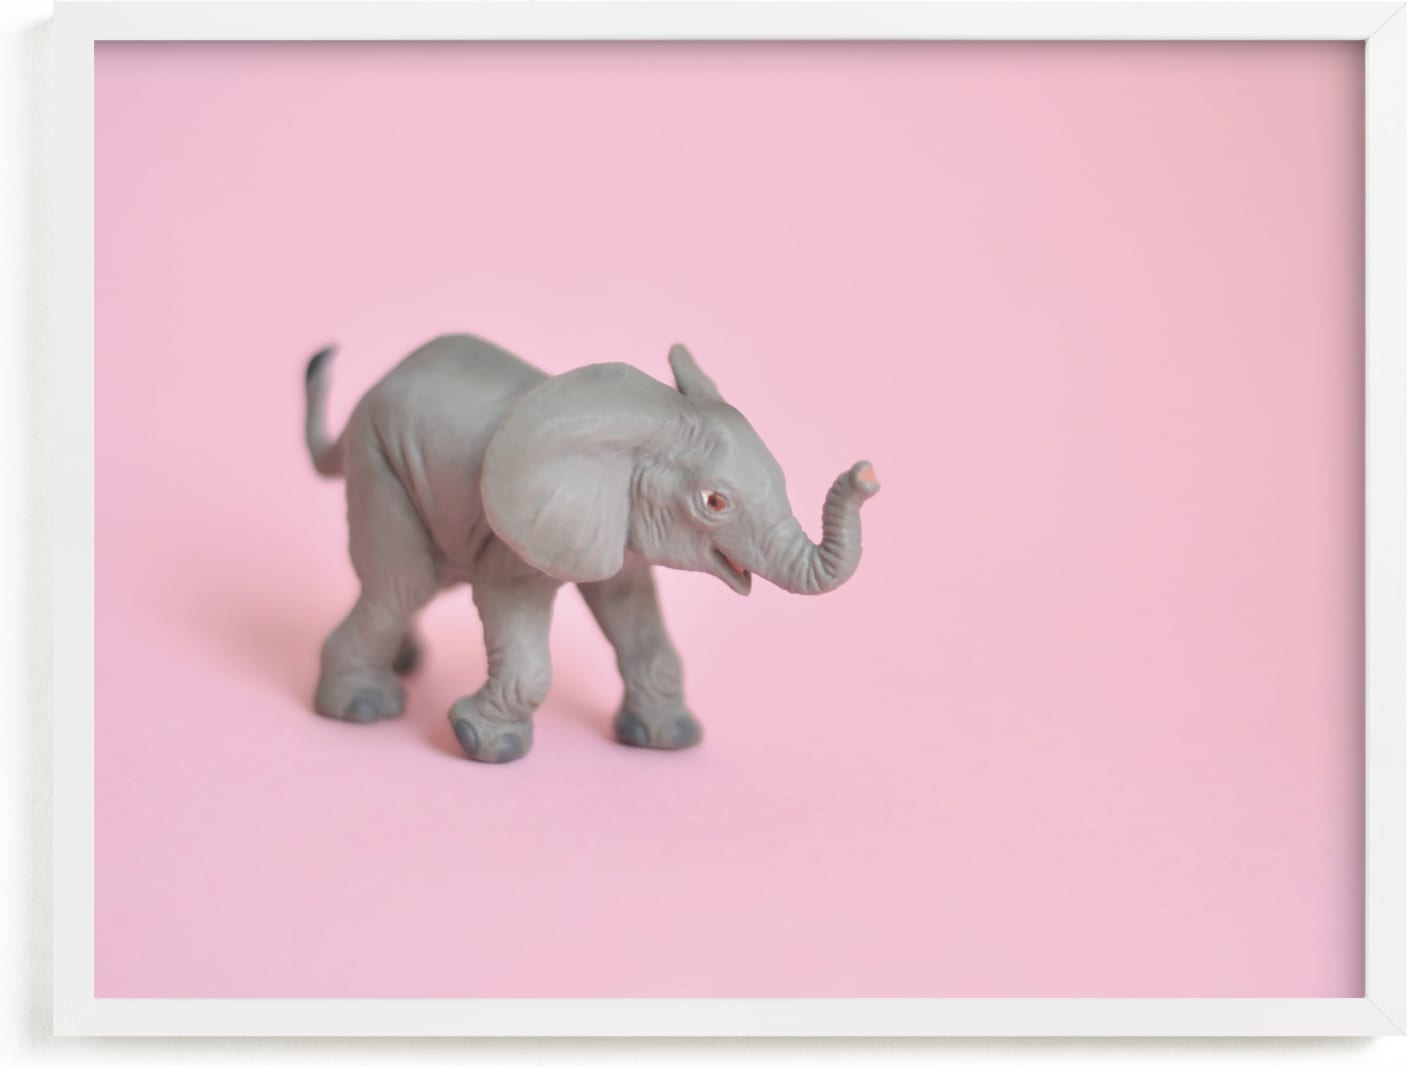 This is a pink kids wall art by Kinga Subject called Toy Elephant.